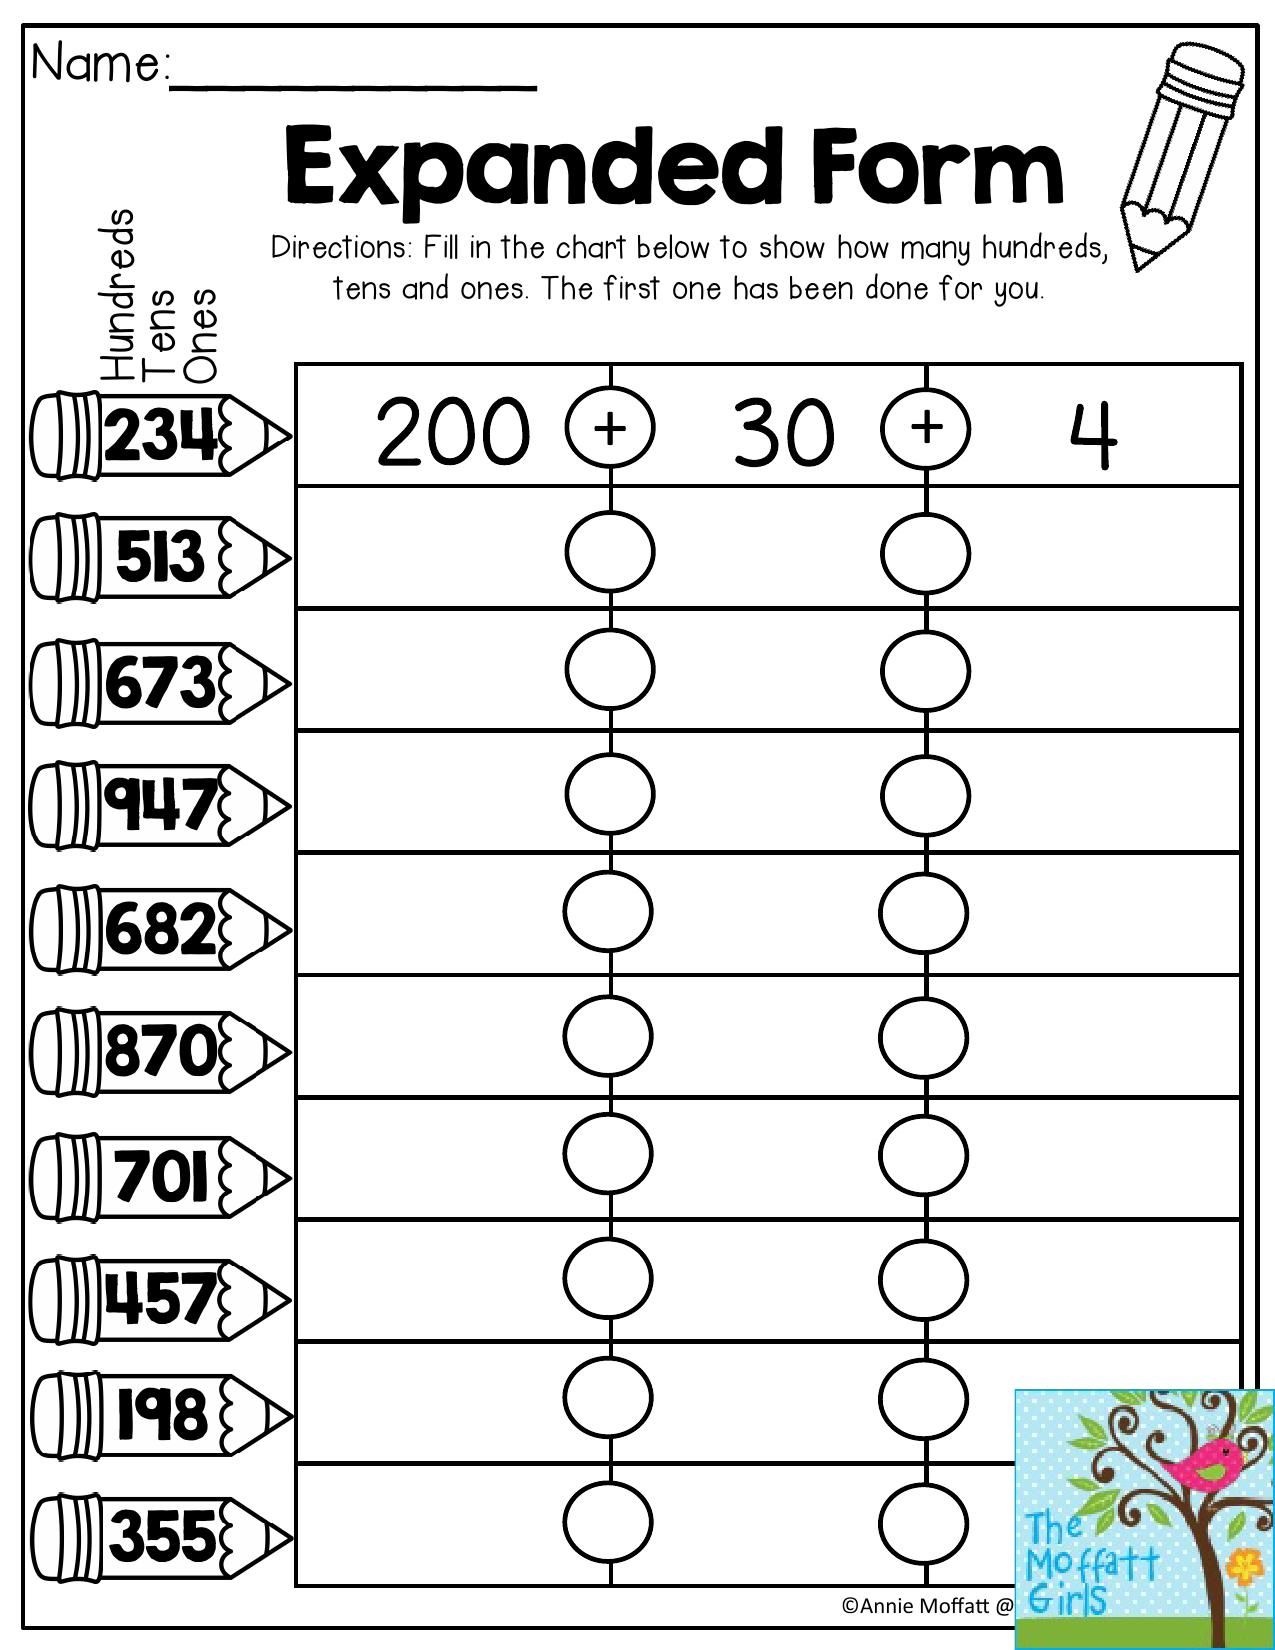 Expanded Form- Fill In The Chart To Show How Many Hundreds, Tens And - Free Printable Expanded Notation Worksheets